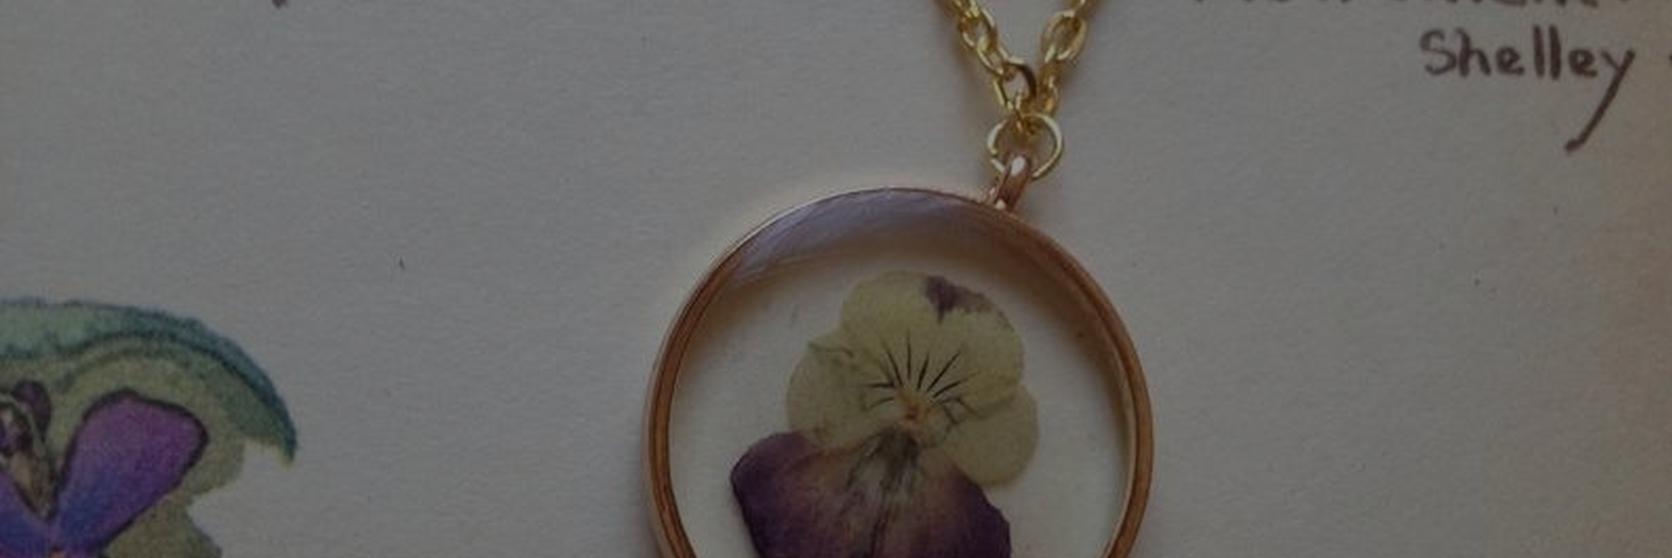 Etsy-Flower-necklace